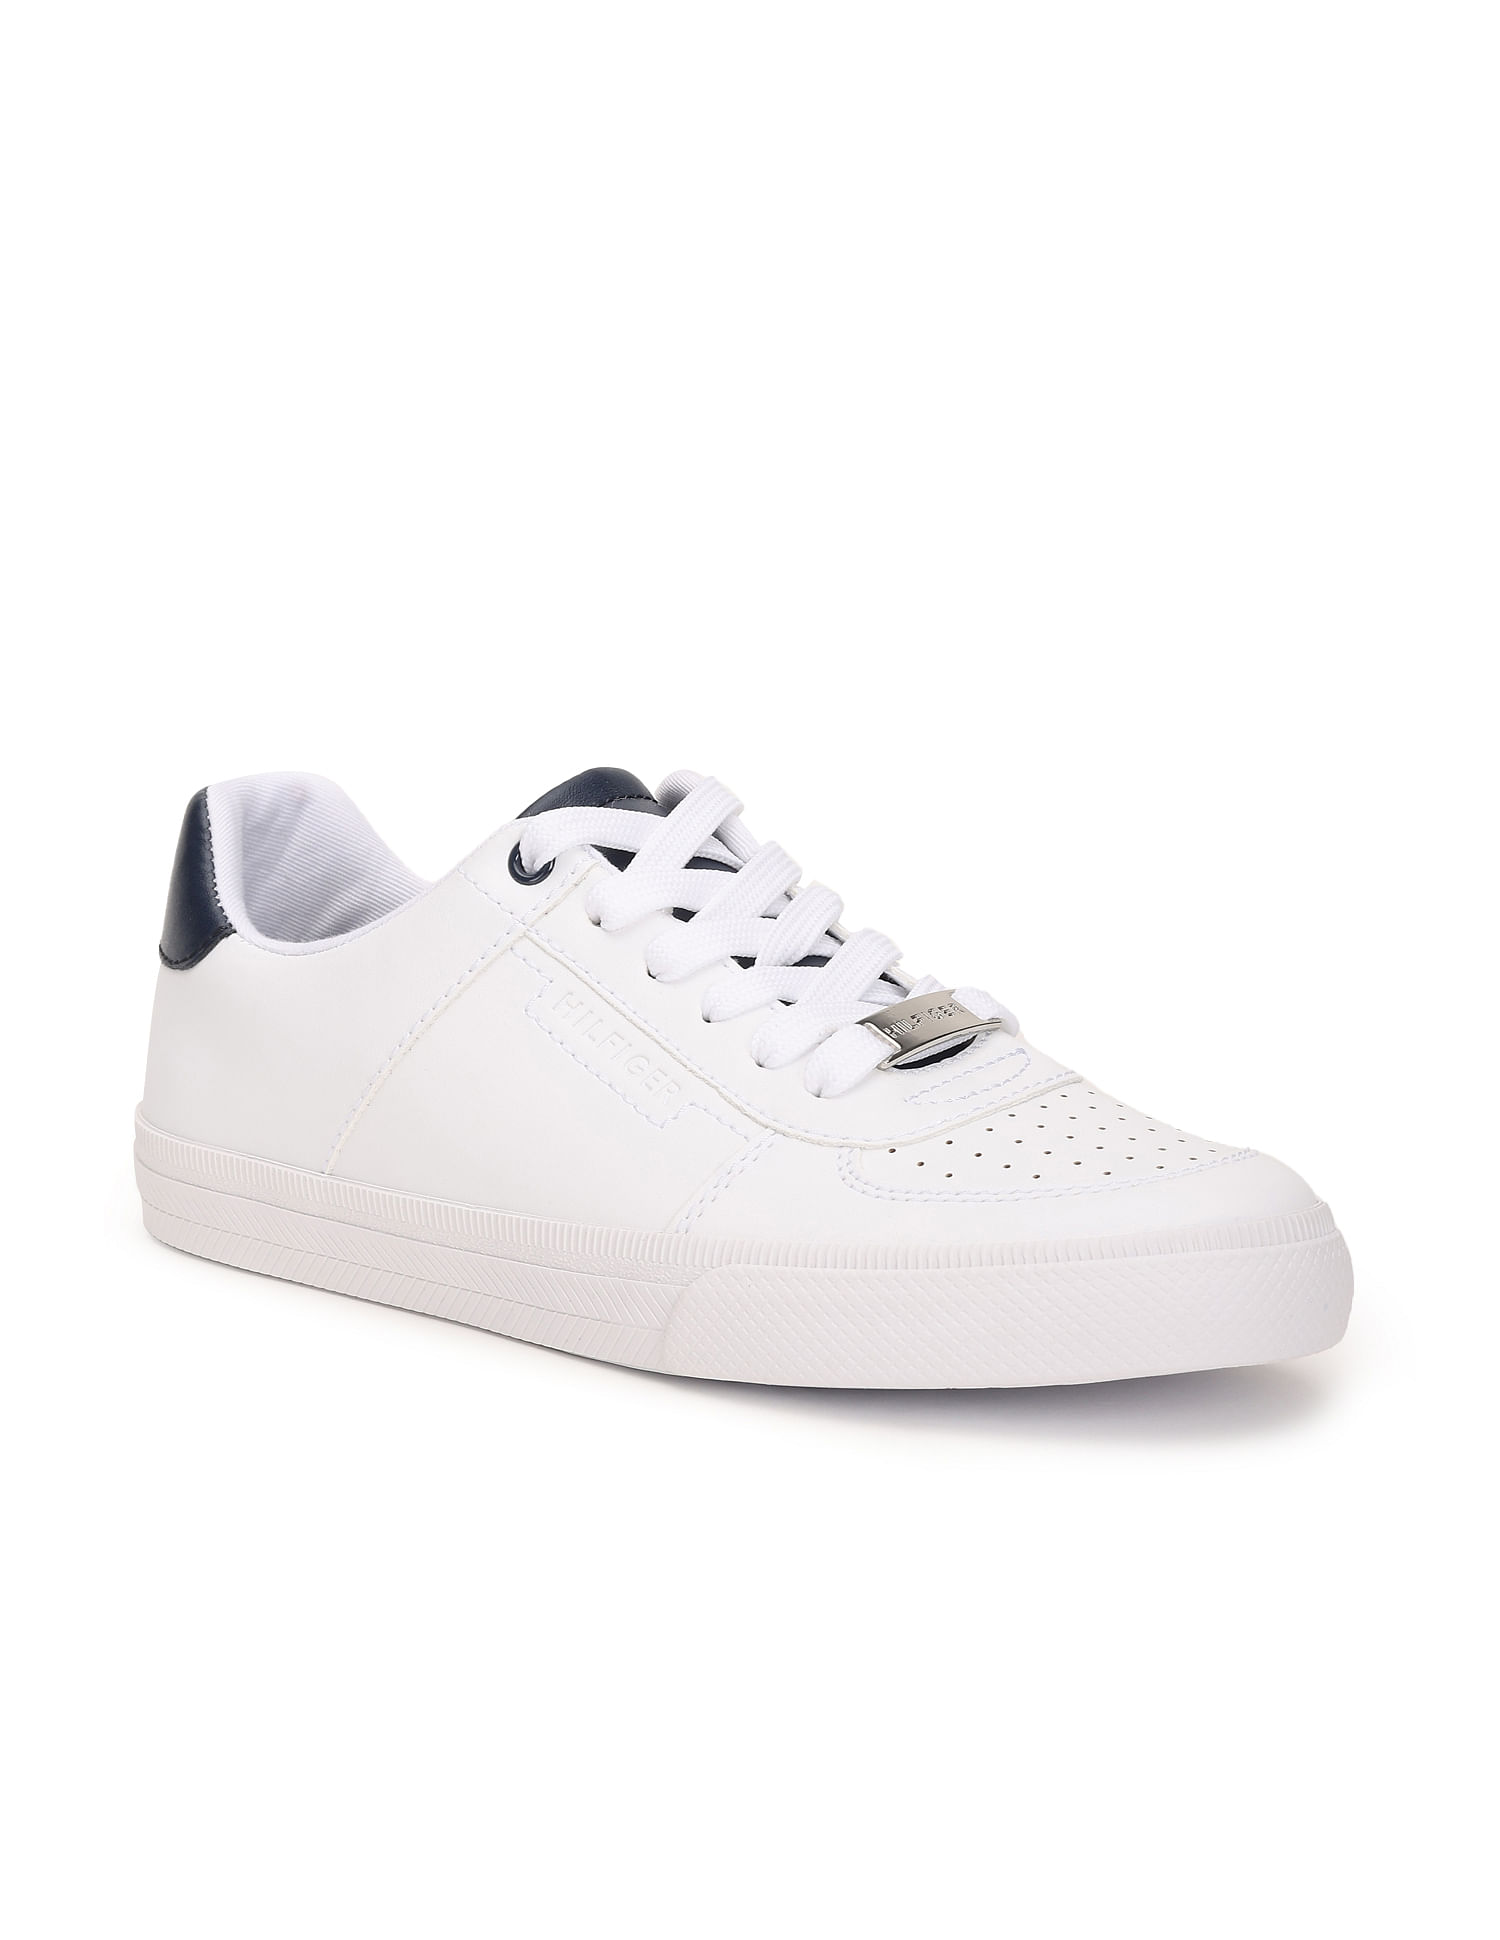 Buy Tommy Hilfiger Womens Low-Top Sneakers at Ubuy India